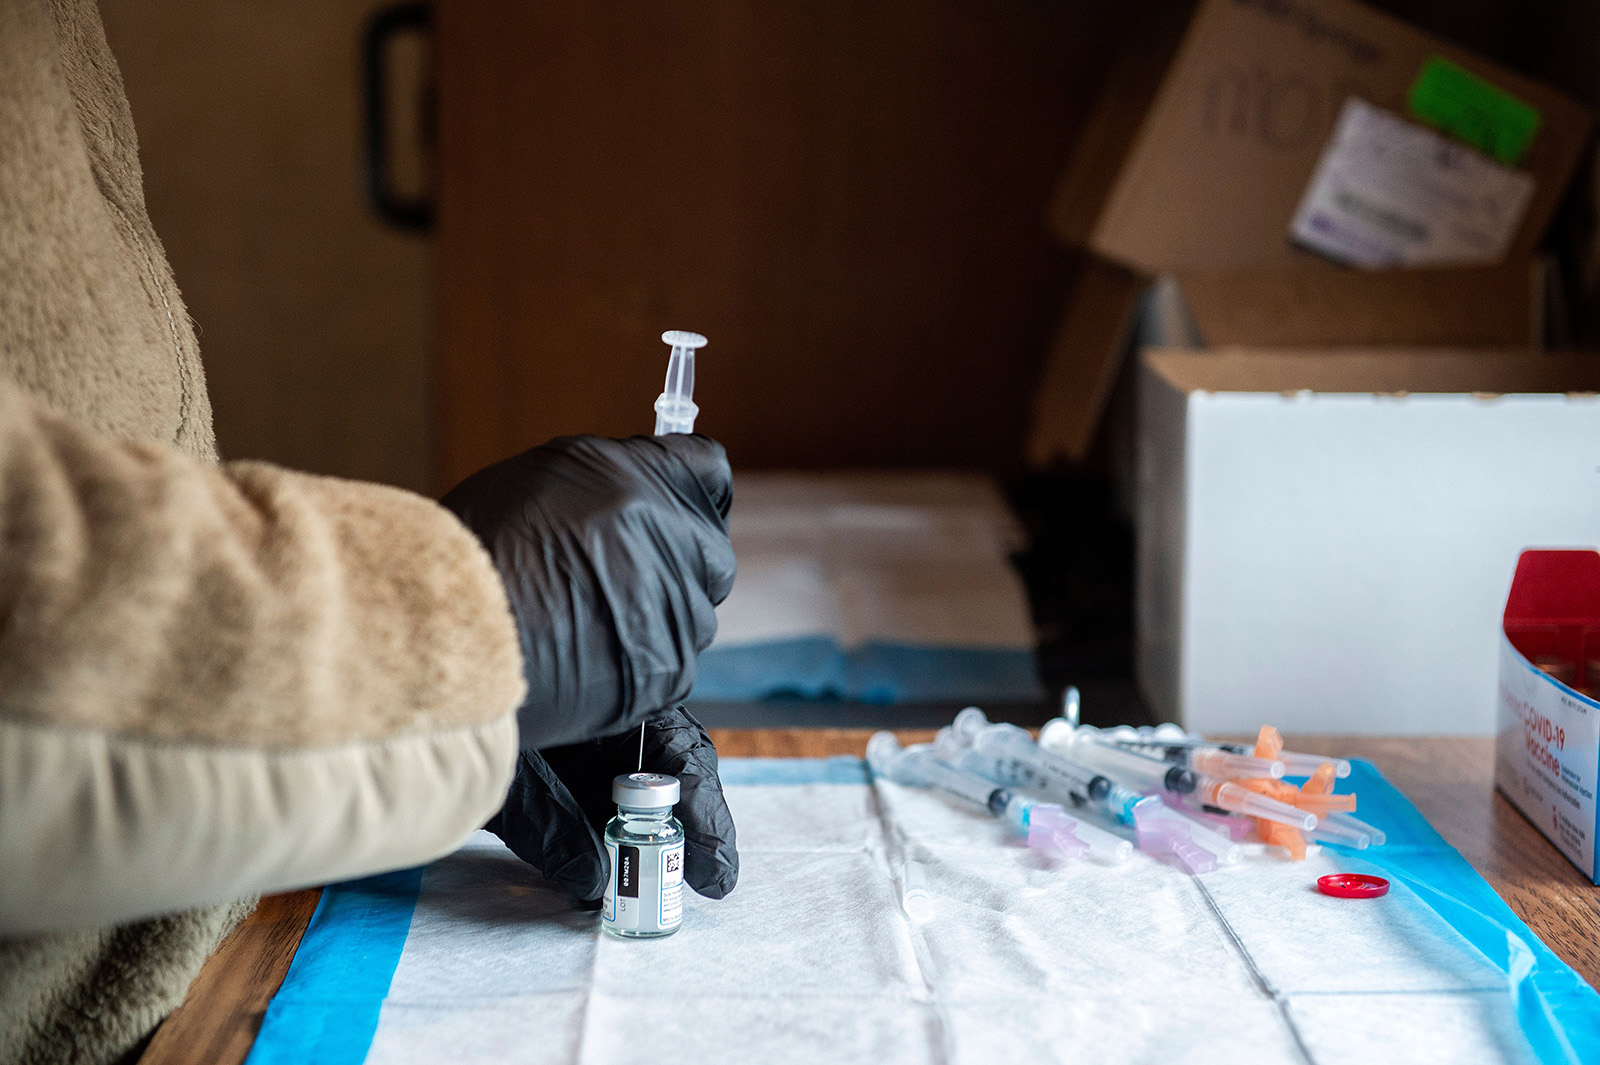 A soldier fills syringes with the Moderna Covid-19 vaccine inside a trailer at a vaccination center in Londonderry, New Hampshire on February 4.